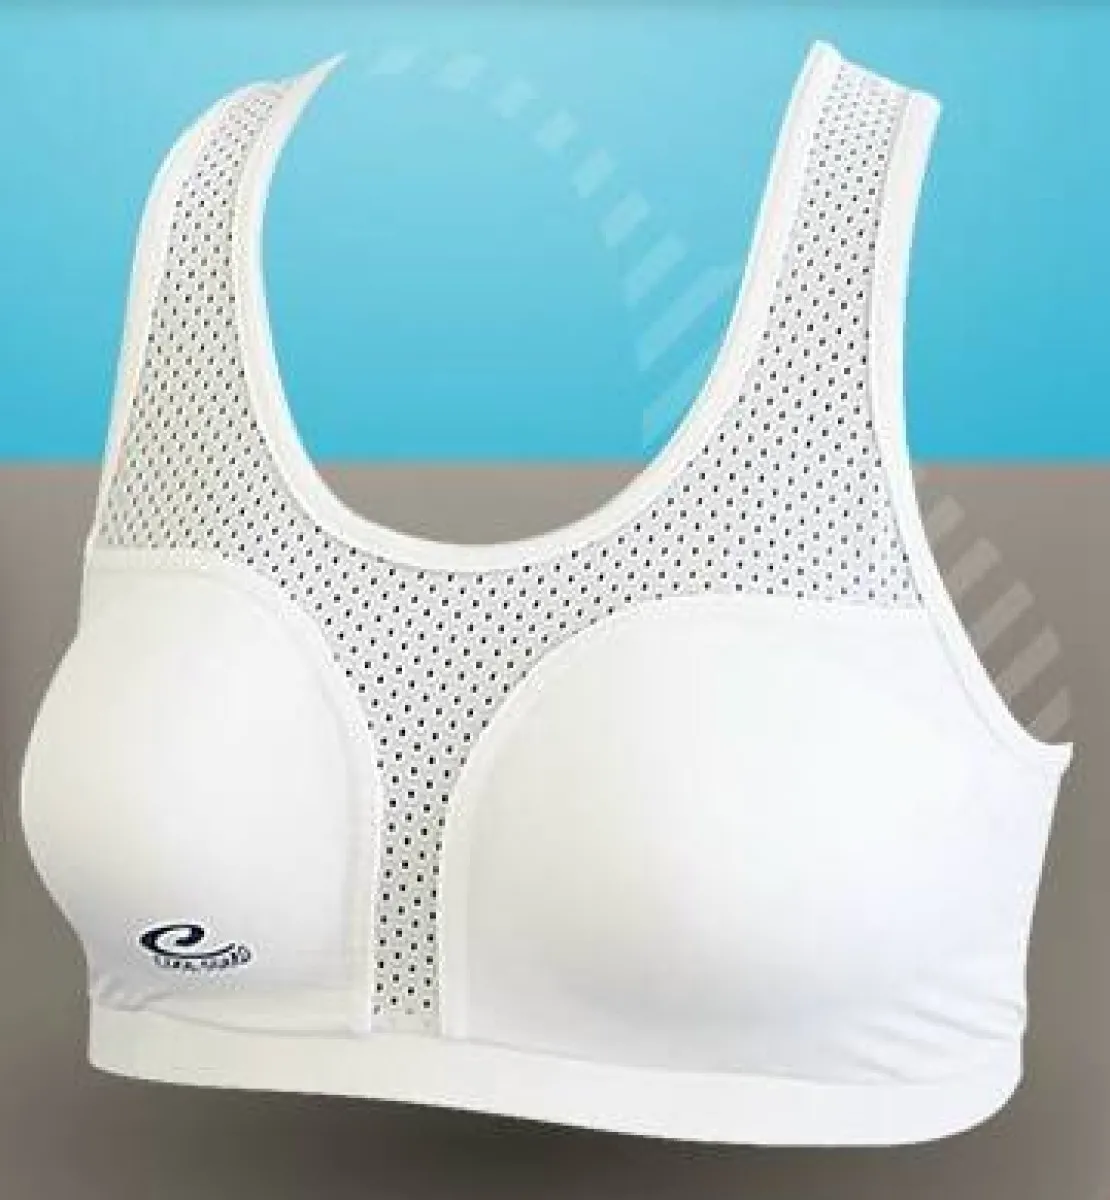 Ladies chest protector Cool Guard with white top complete set